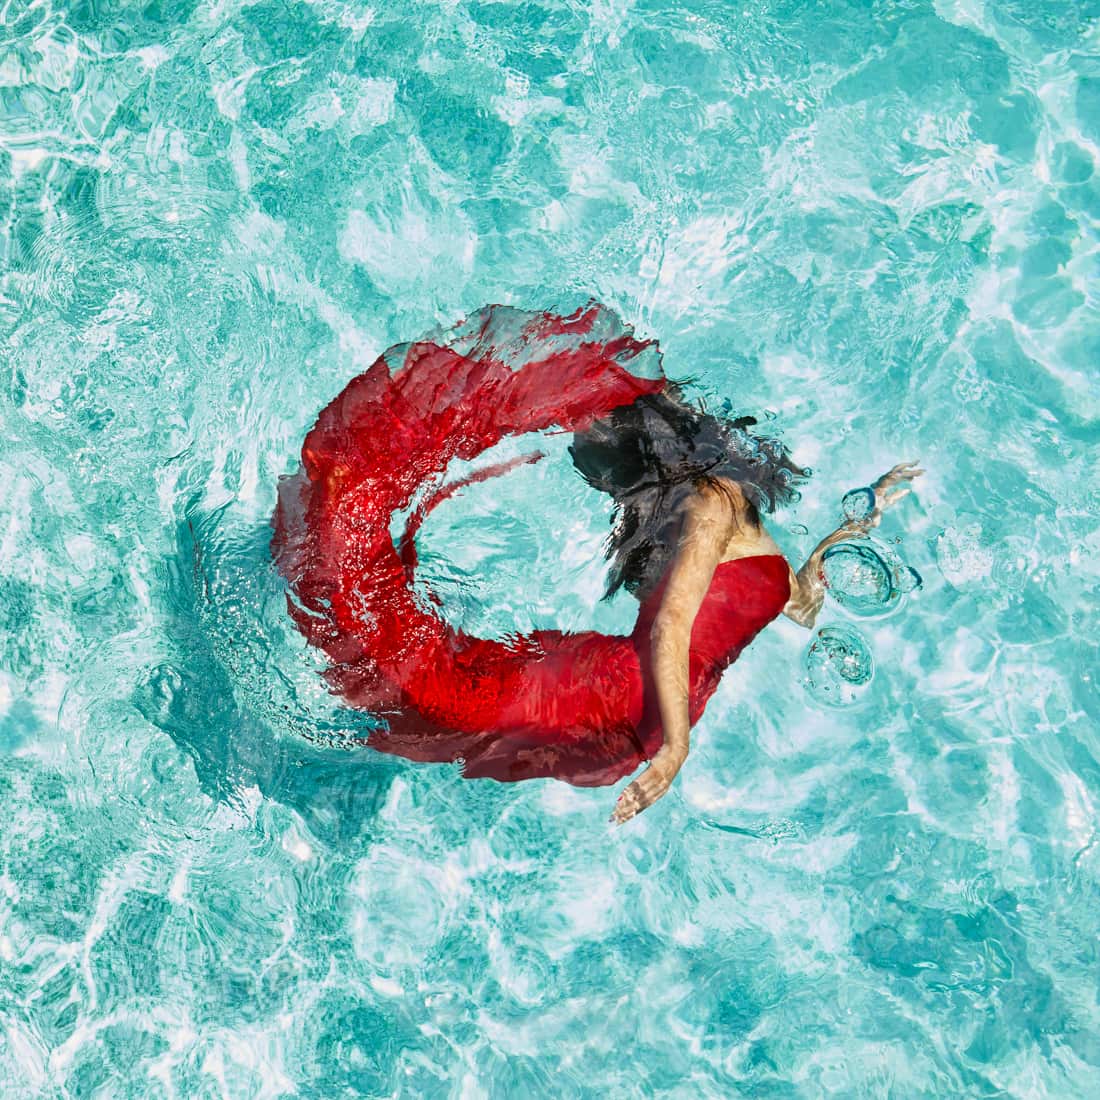 Photograph of woman in red dress swimming just below the water's surface. Her body arches back to form a circle